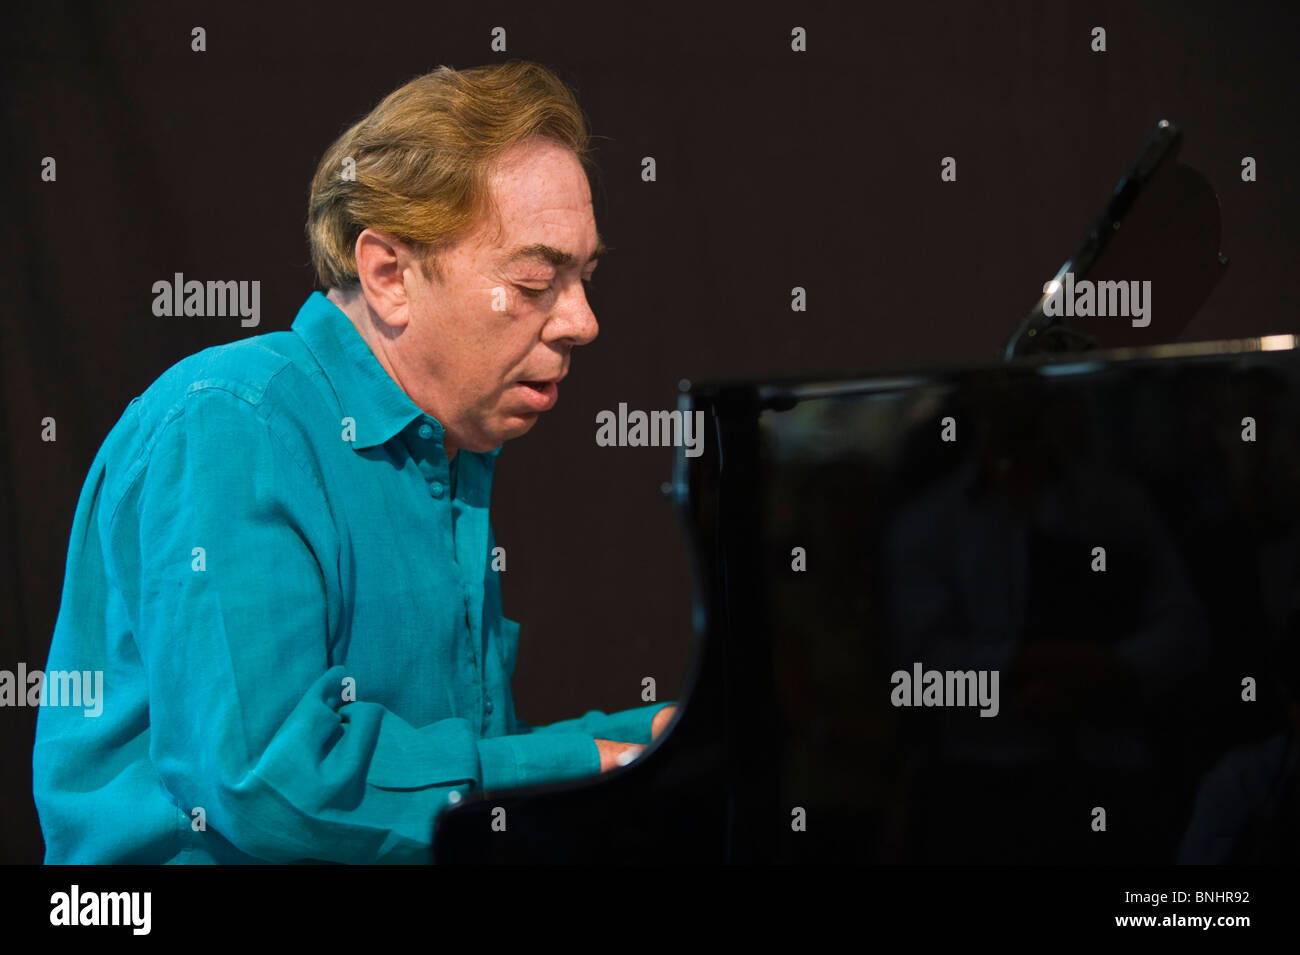 Andrew Lloyd Webber playing piano at Wales Millennium Centre Cardiff South Wales UK Stock Photo